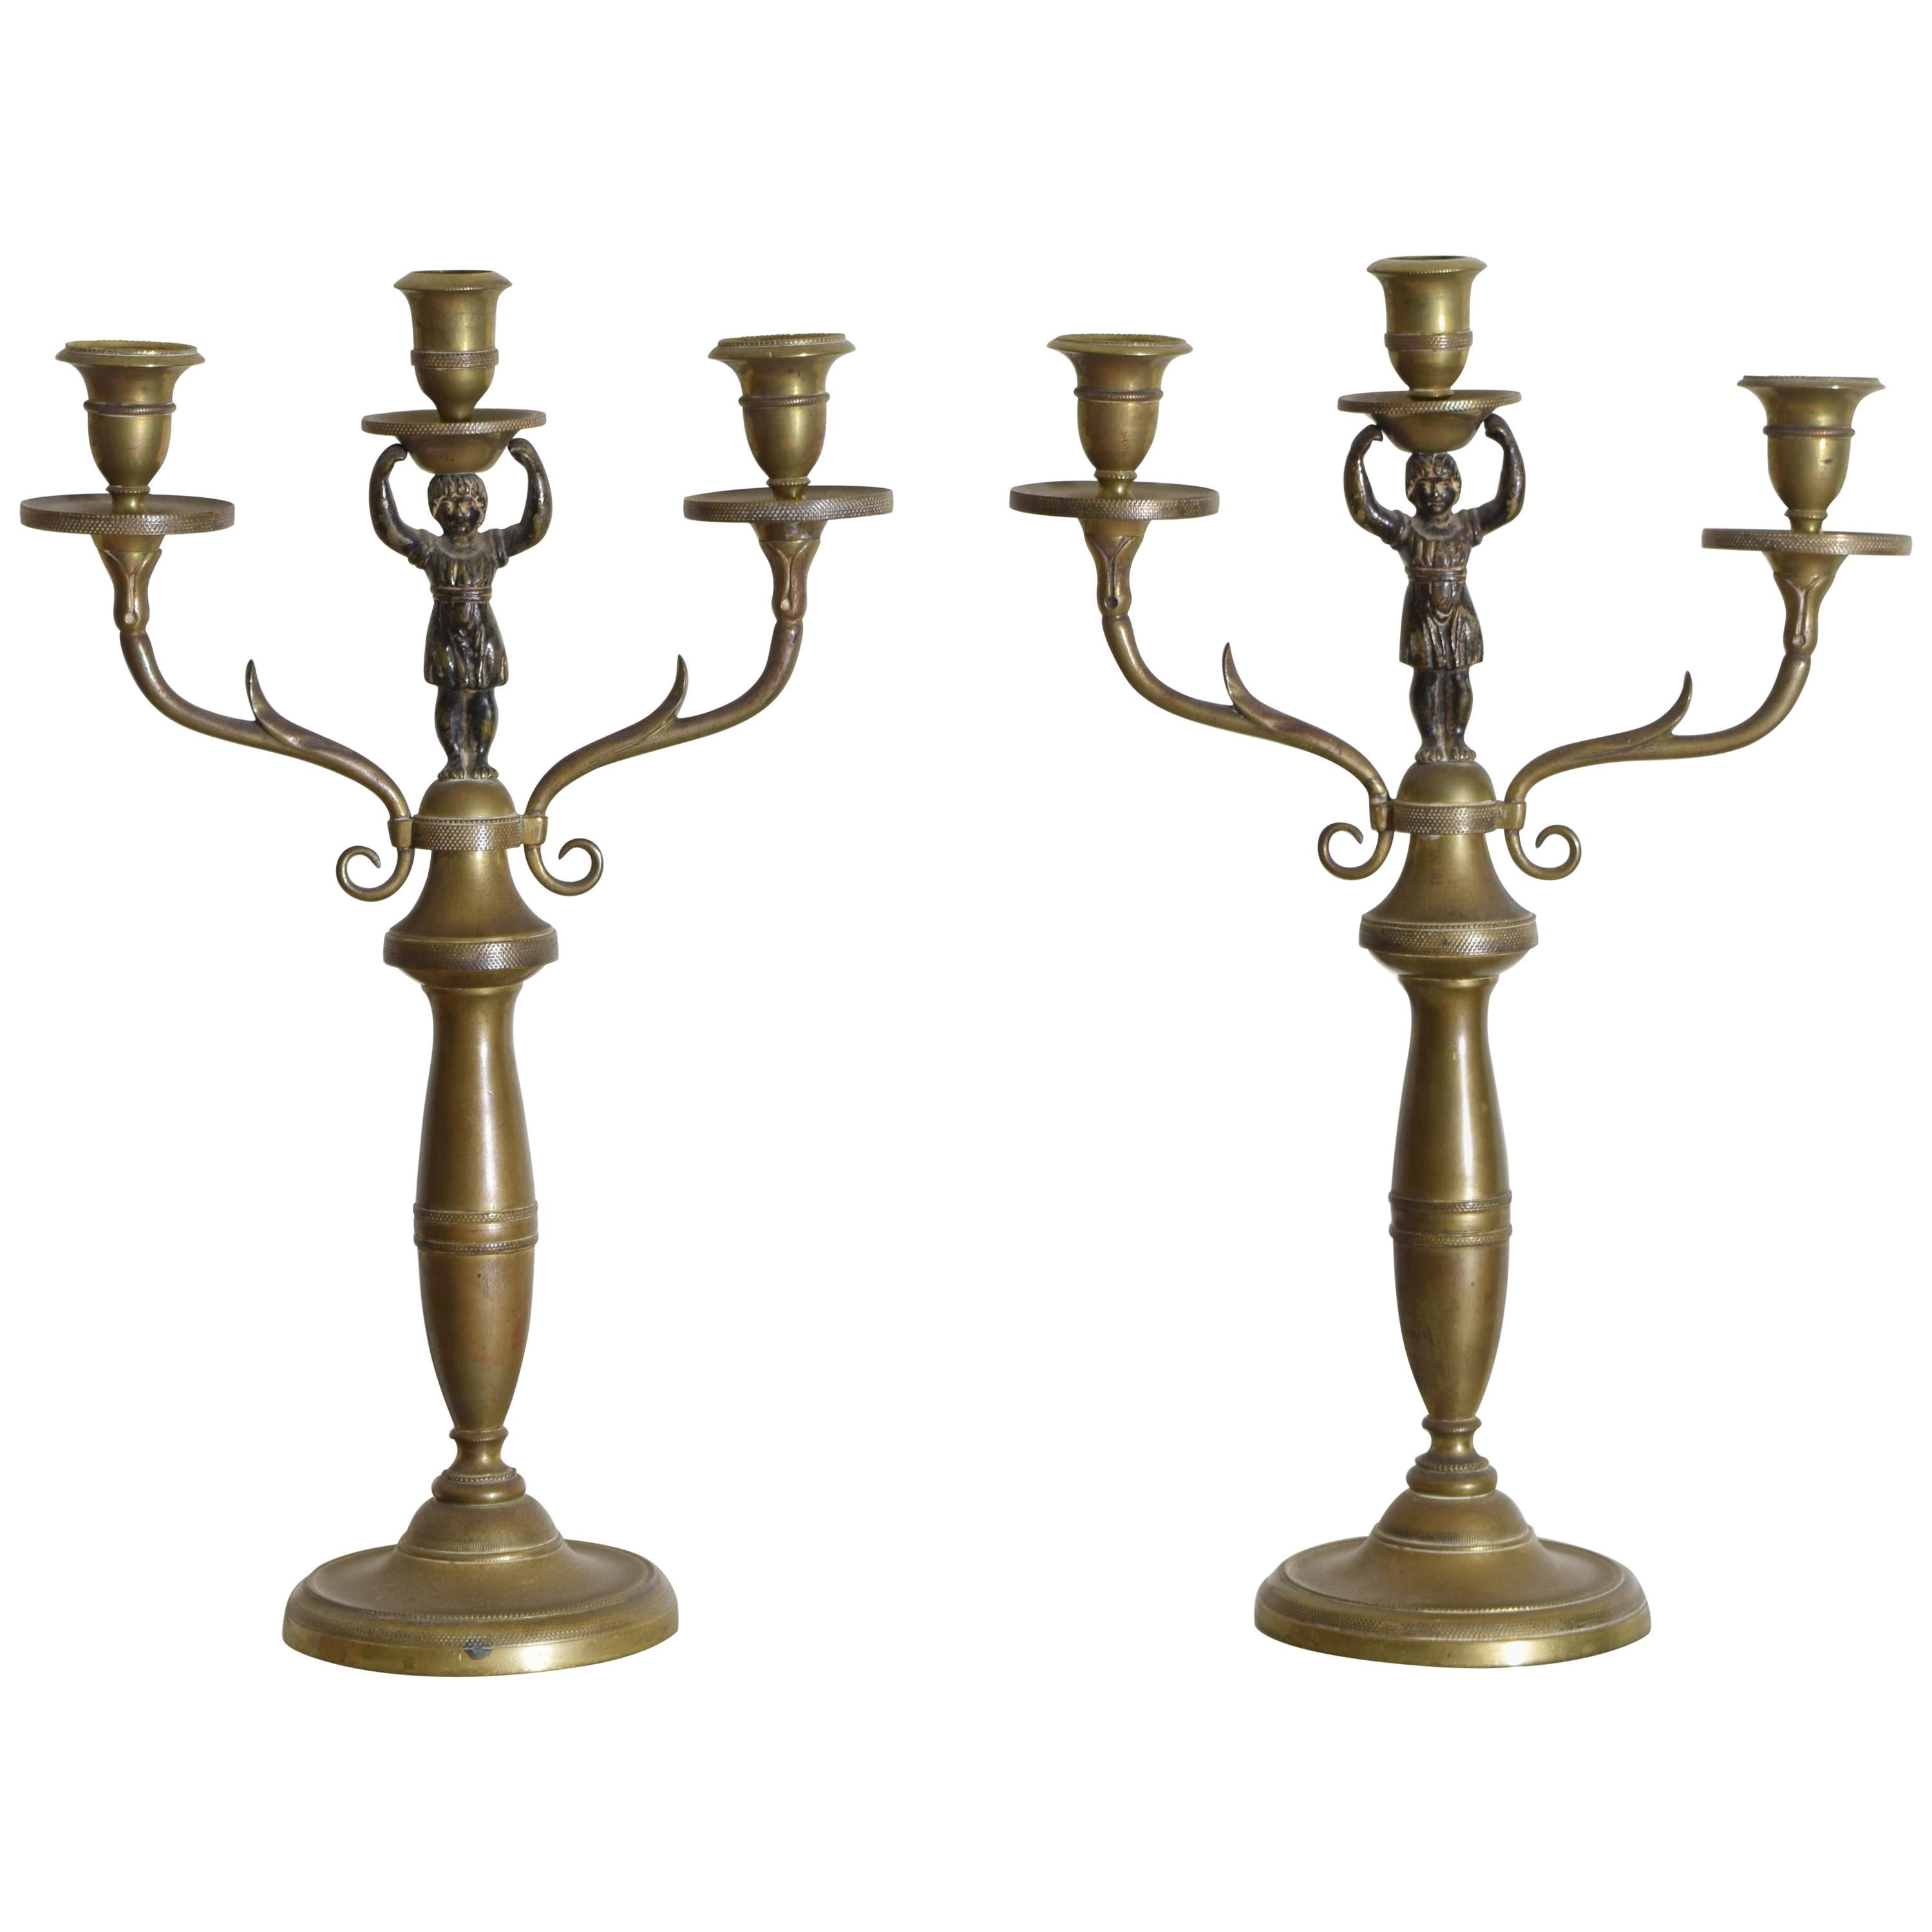 Pair Italian Empire Period Brass 3-Light Figural Candelabras, Early 19th Century